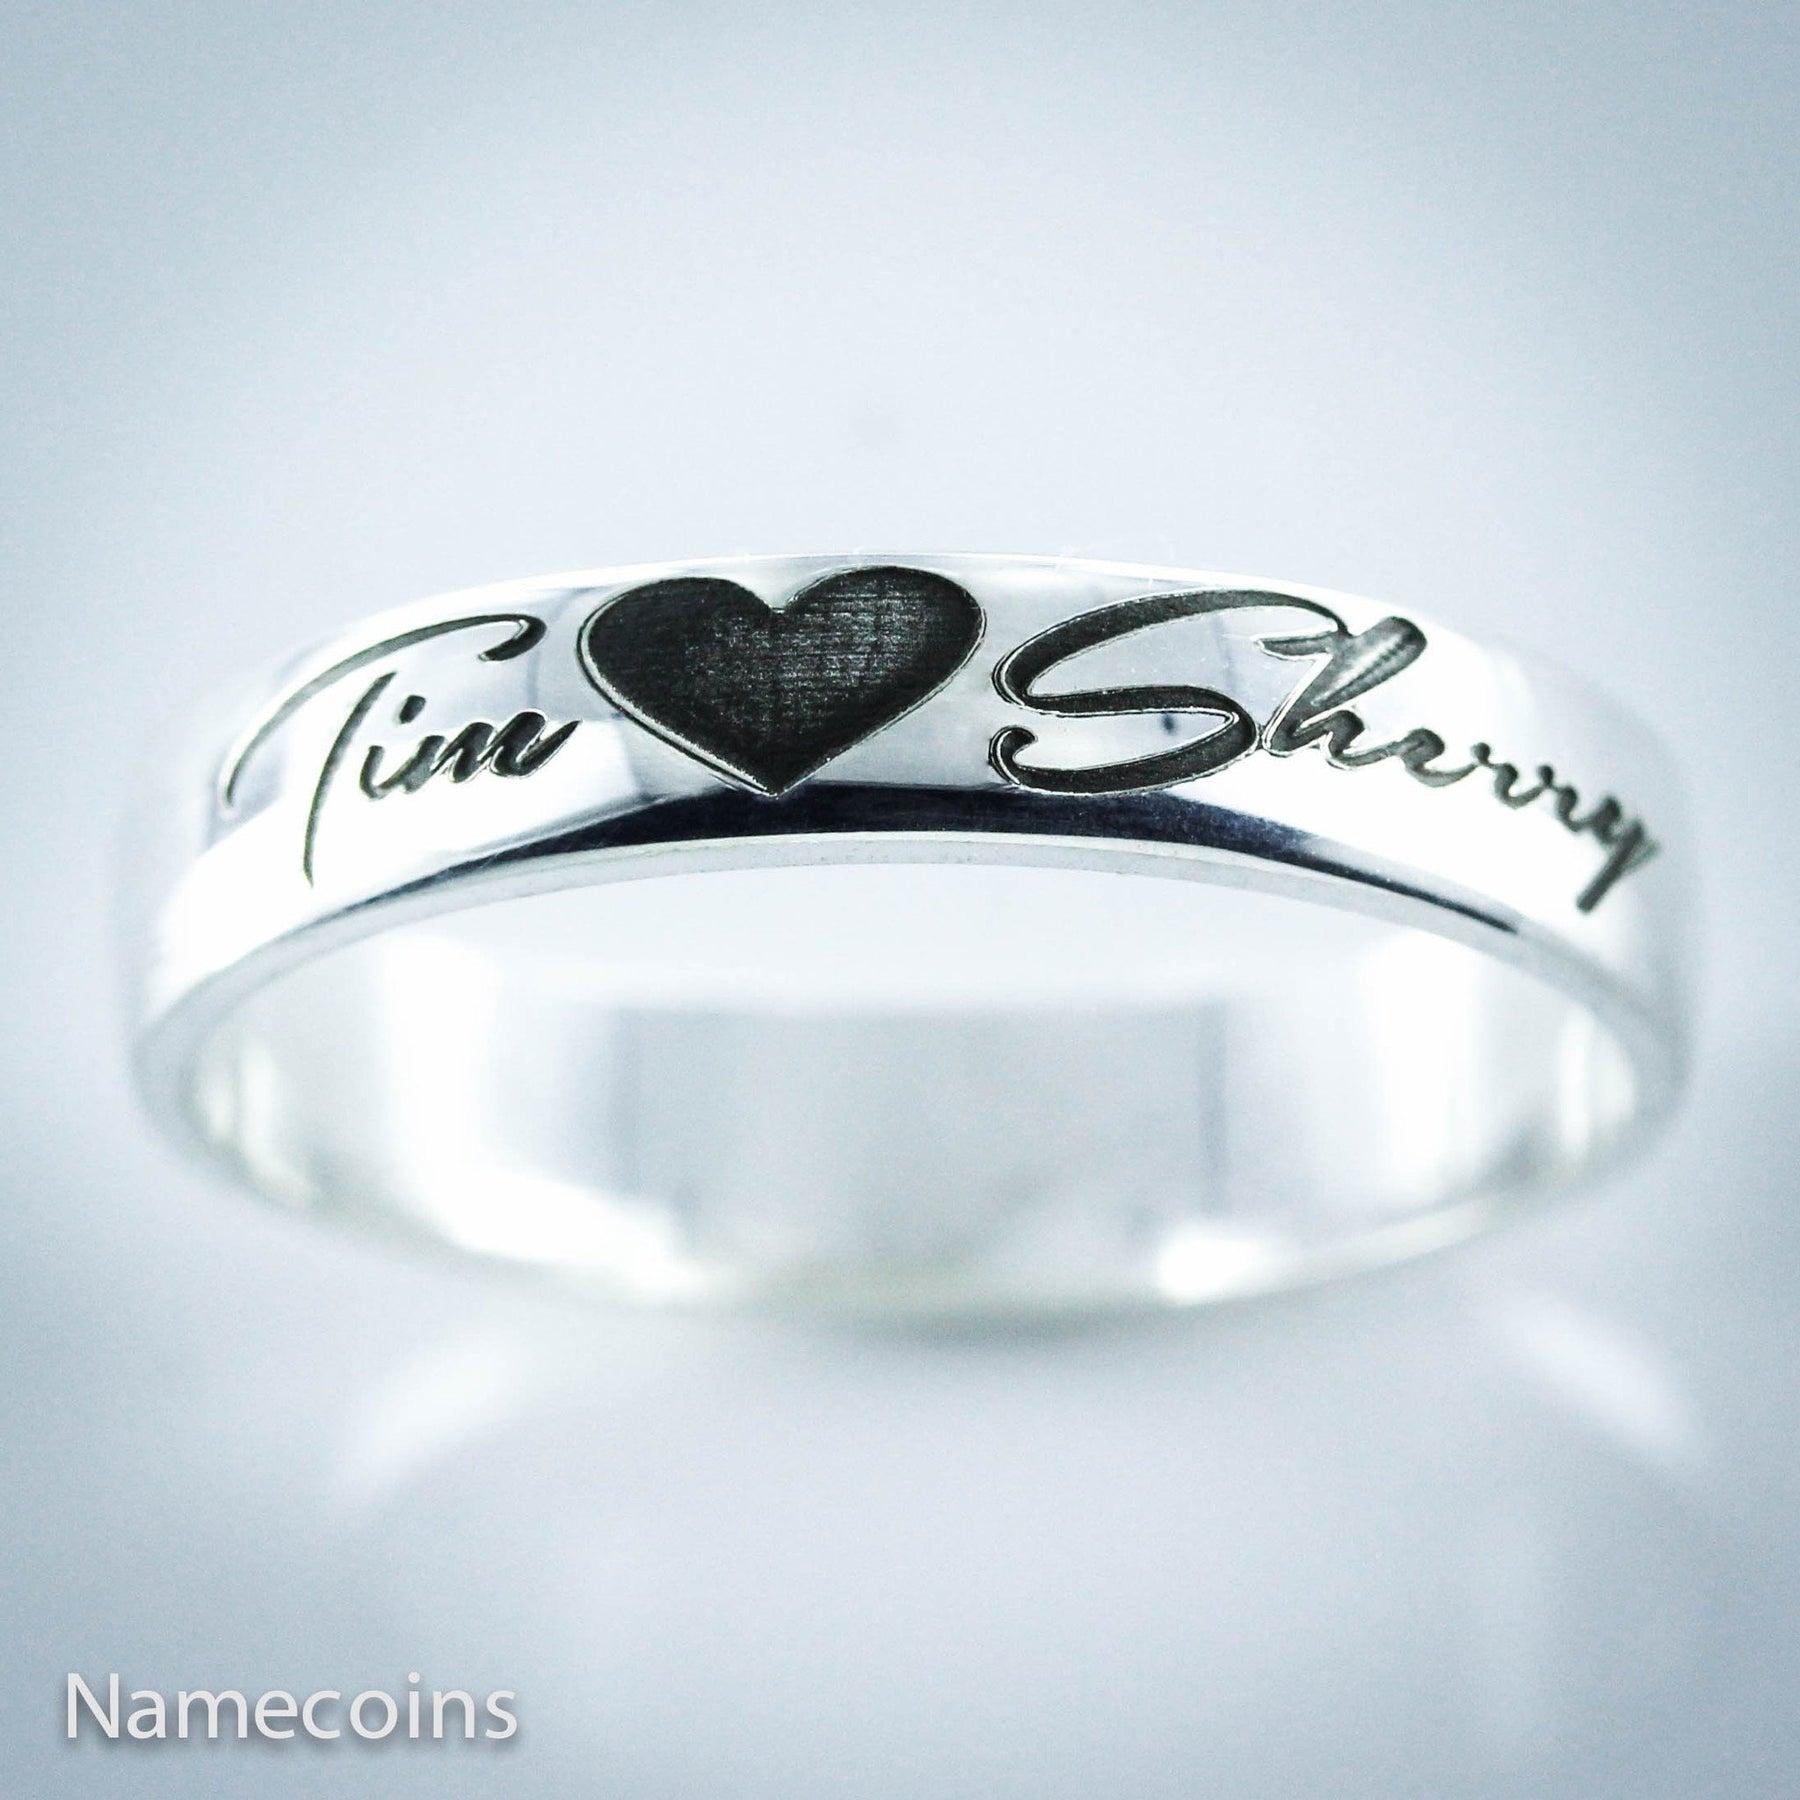 Silver Couple Rings Buy Online | Pair Rings For Couples In Silver